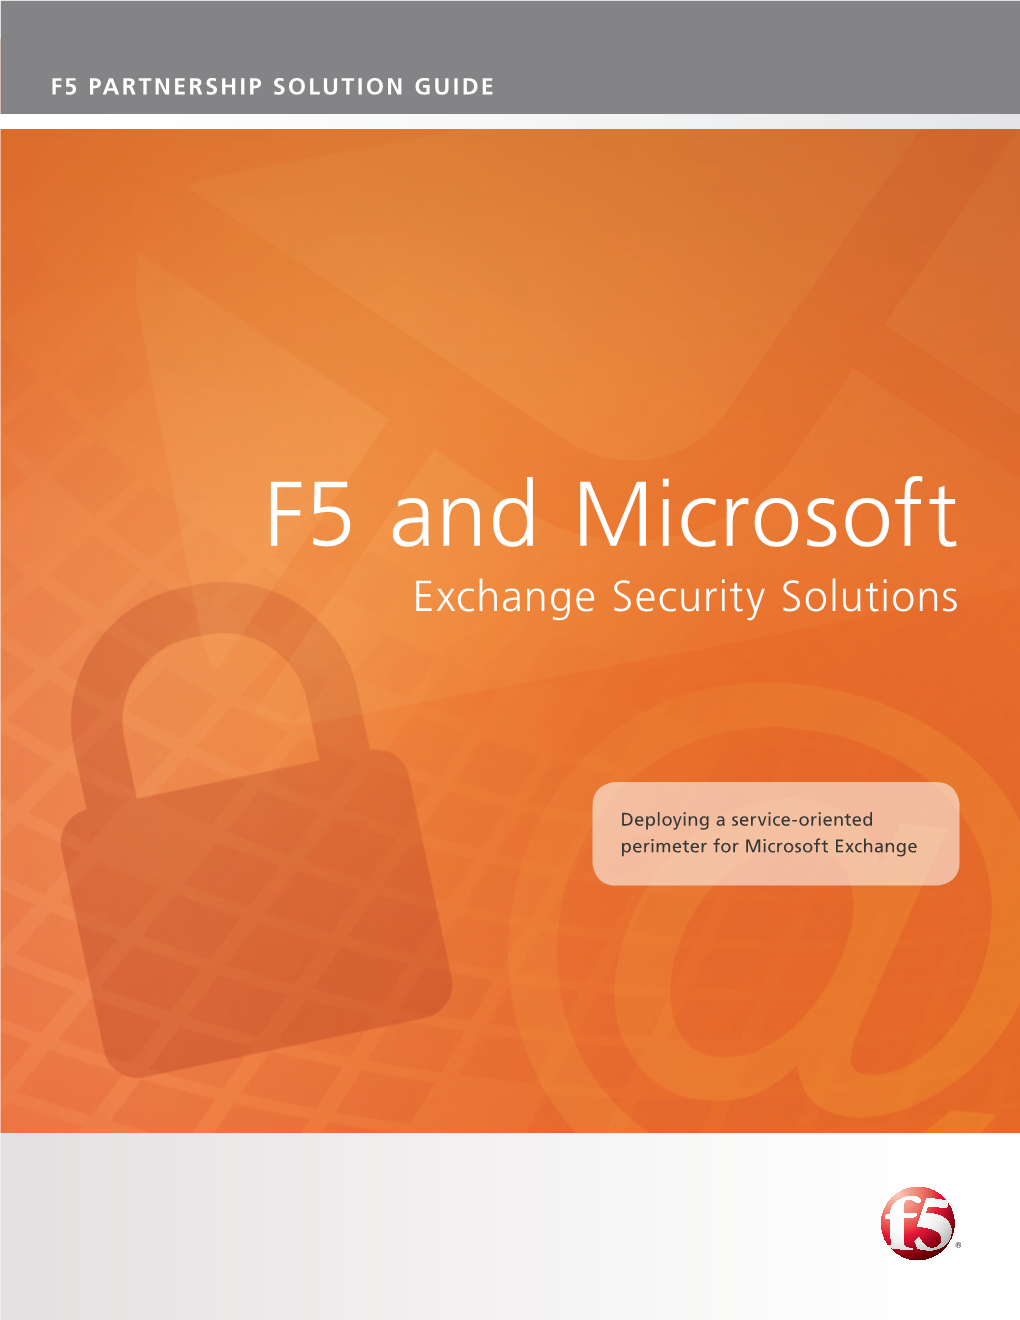 F5 and Microsoft Exchange Security Solutions Guide